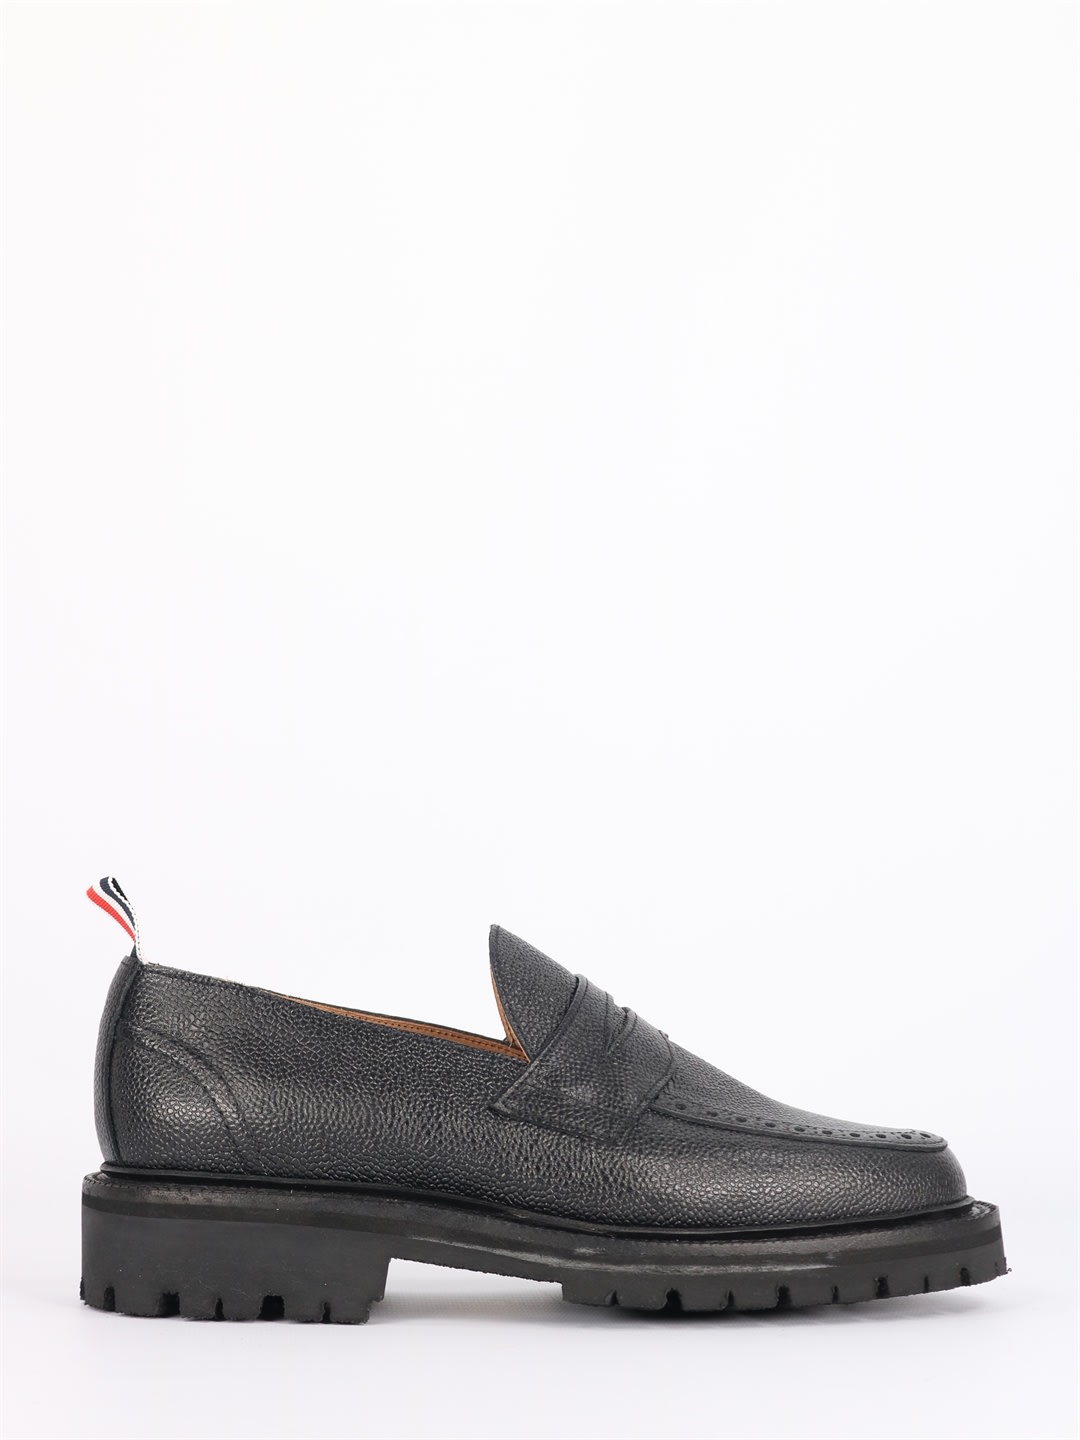 Thom Browne Classic Penny Black Loafers